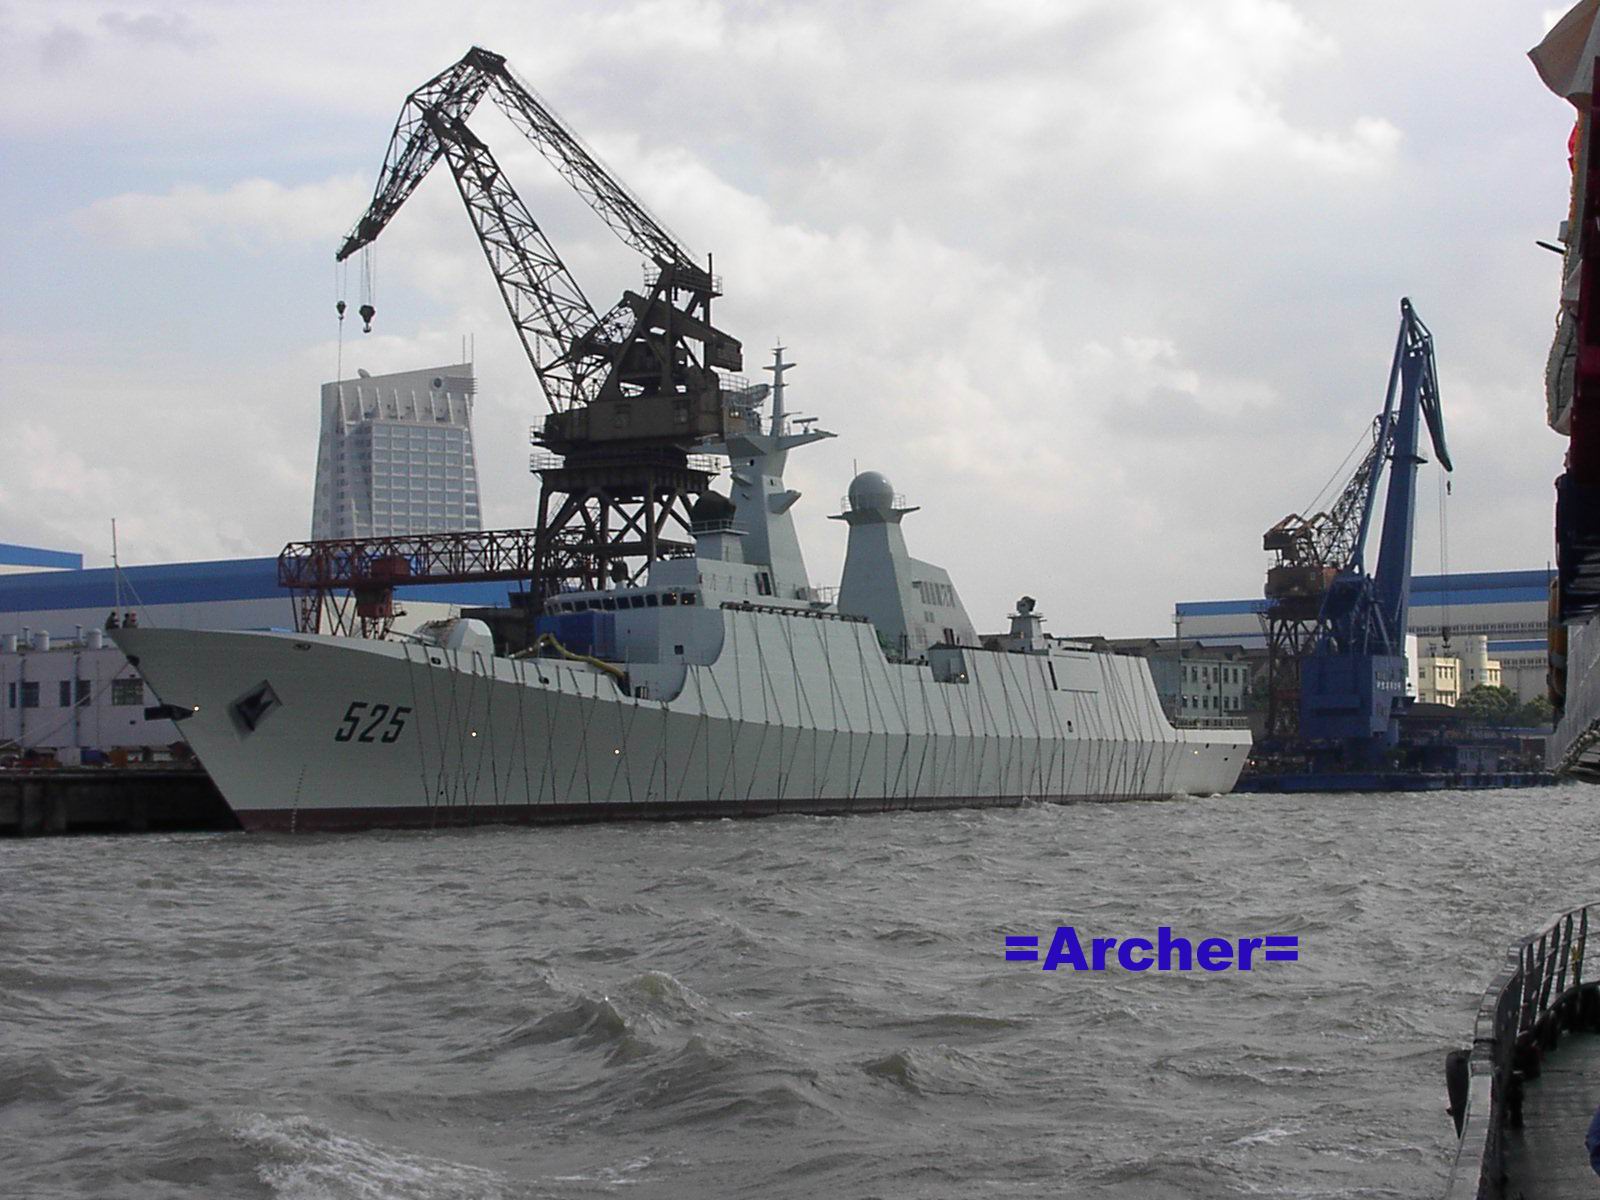 FFG-054-Guided Missile Frigate